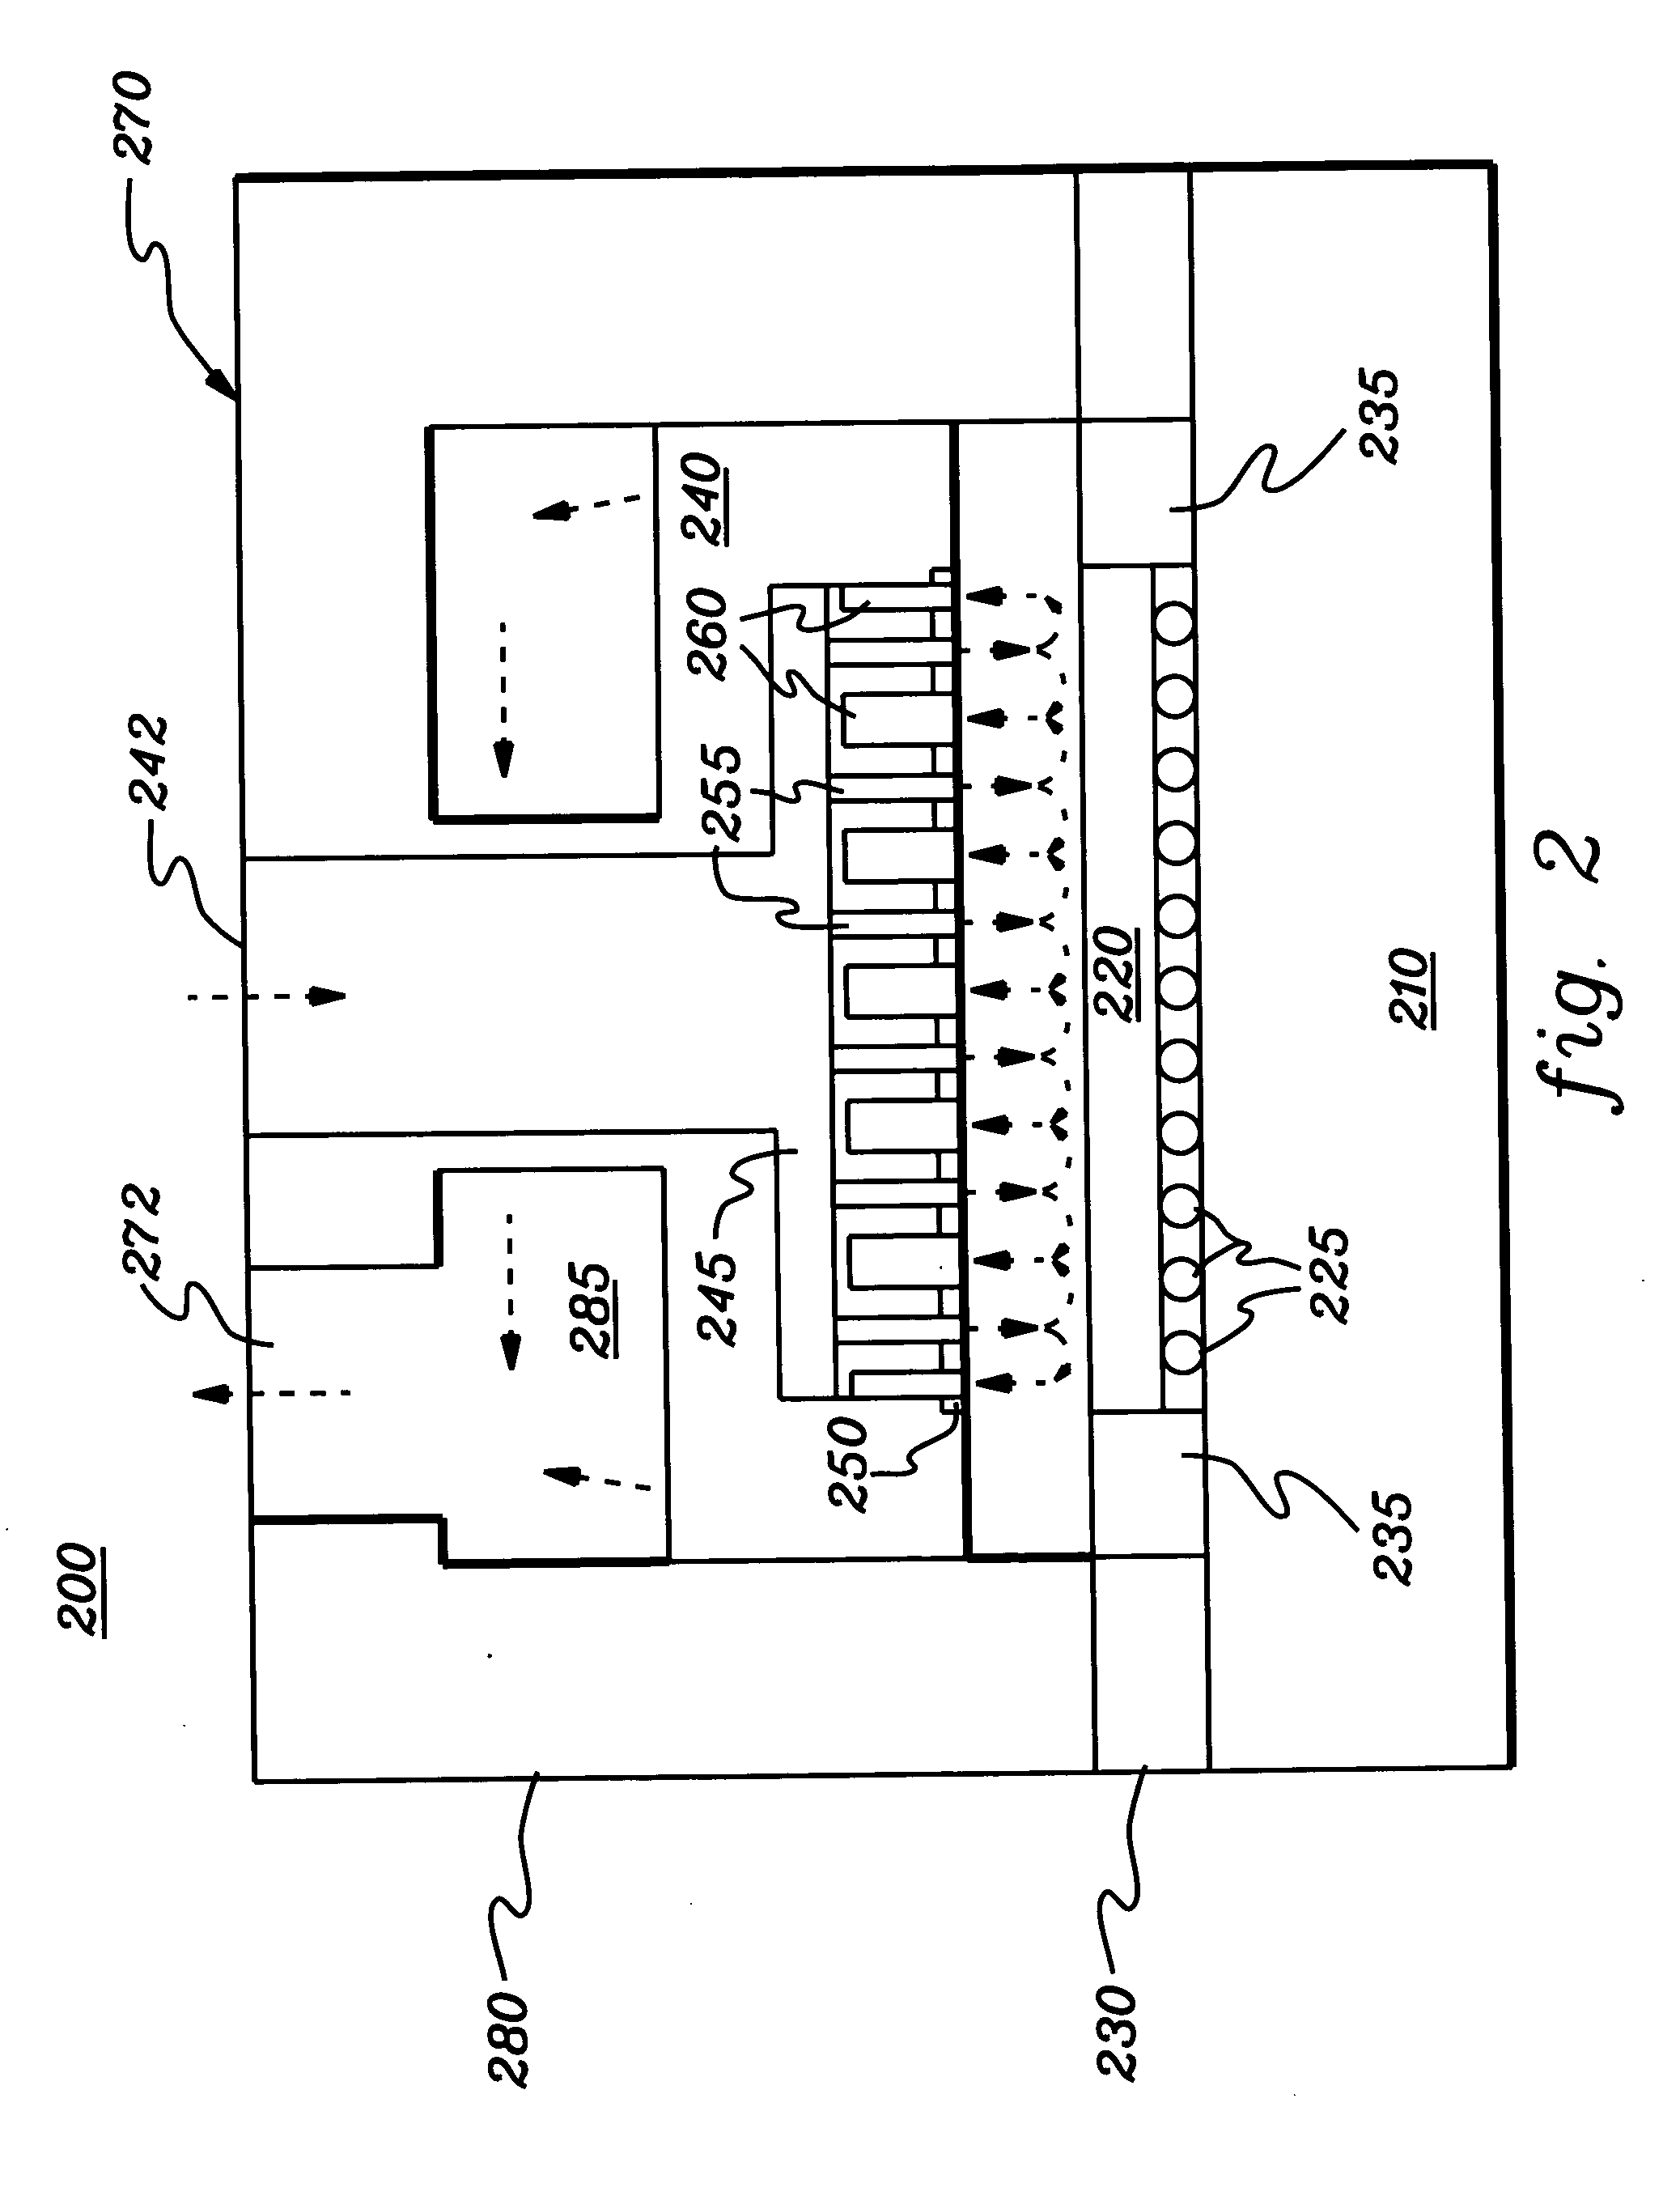 Cooling apparatus, cooled electronic module and methods of fabrication thereof employing an integrated coolant inlet and outlet manifold